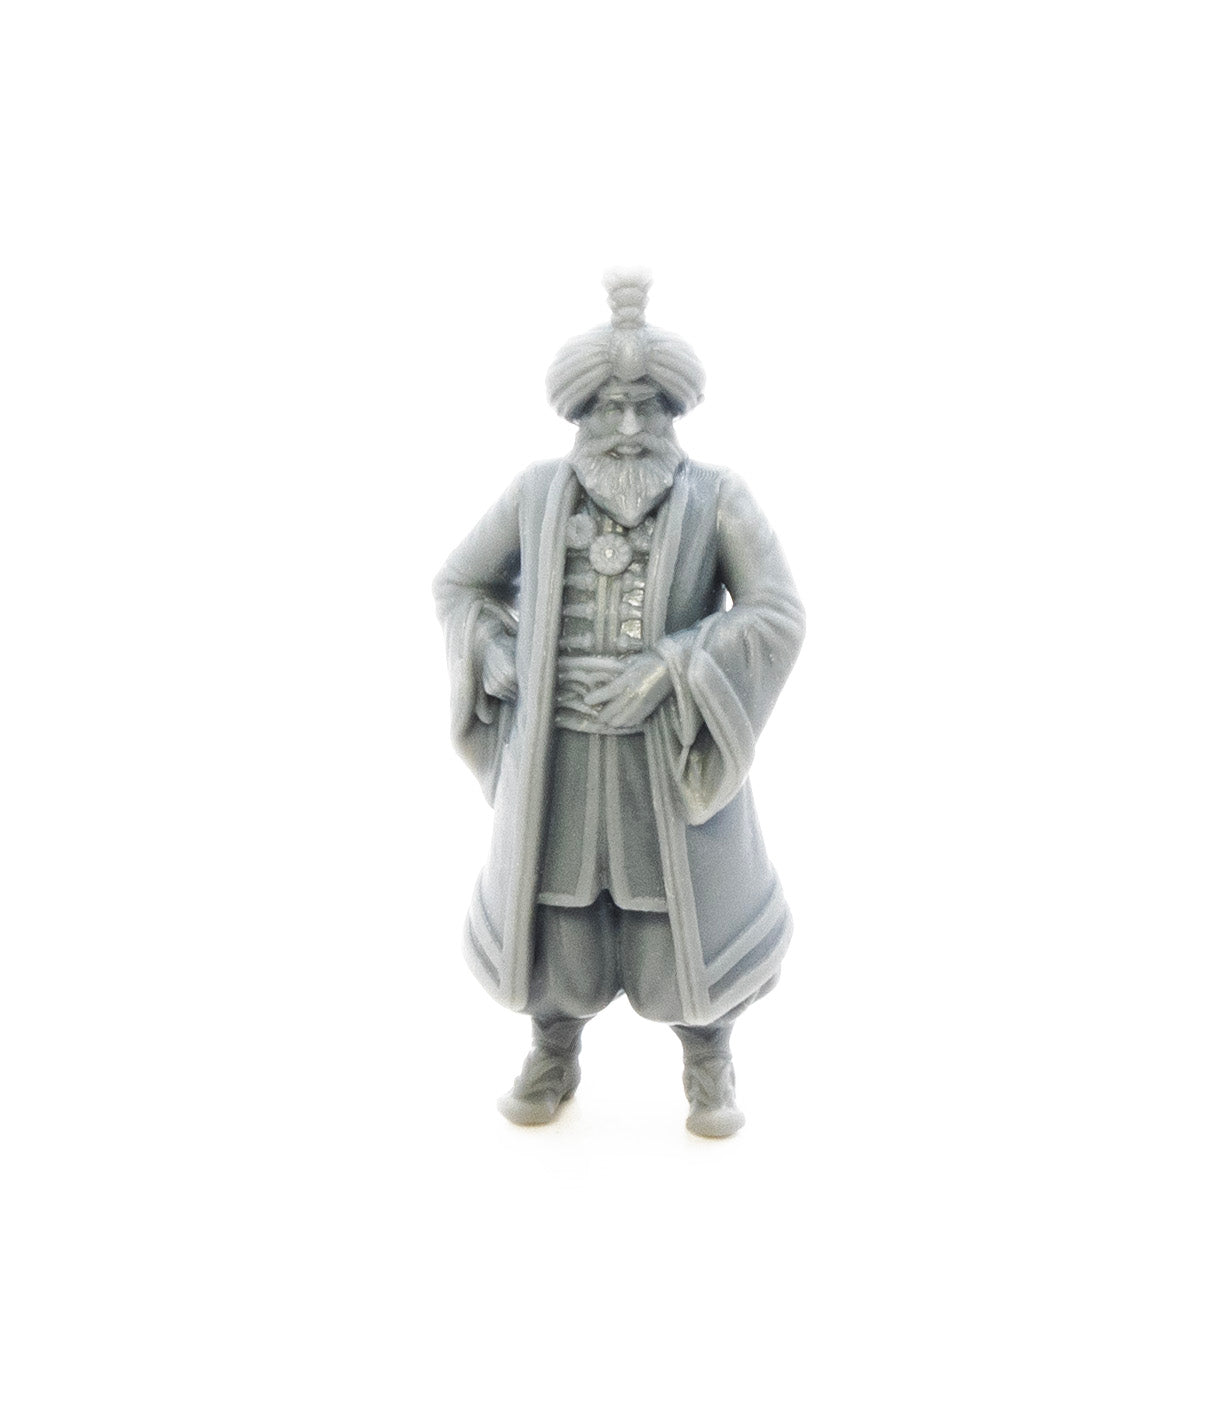 Sultan by Labyrinth Models.